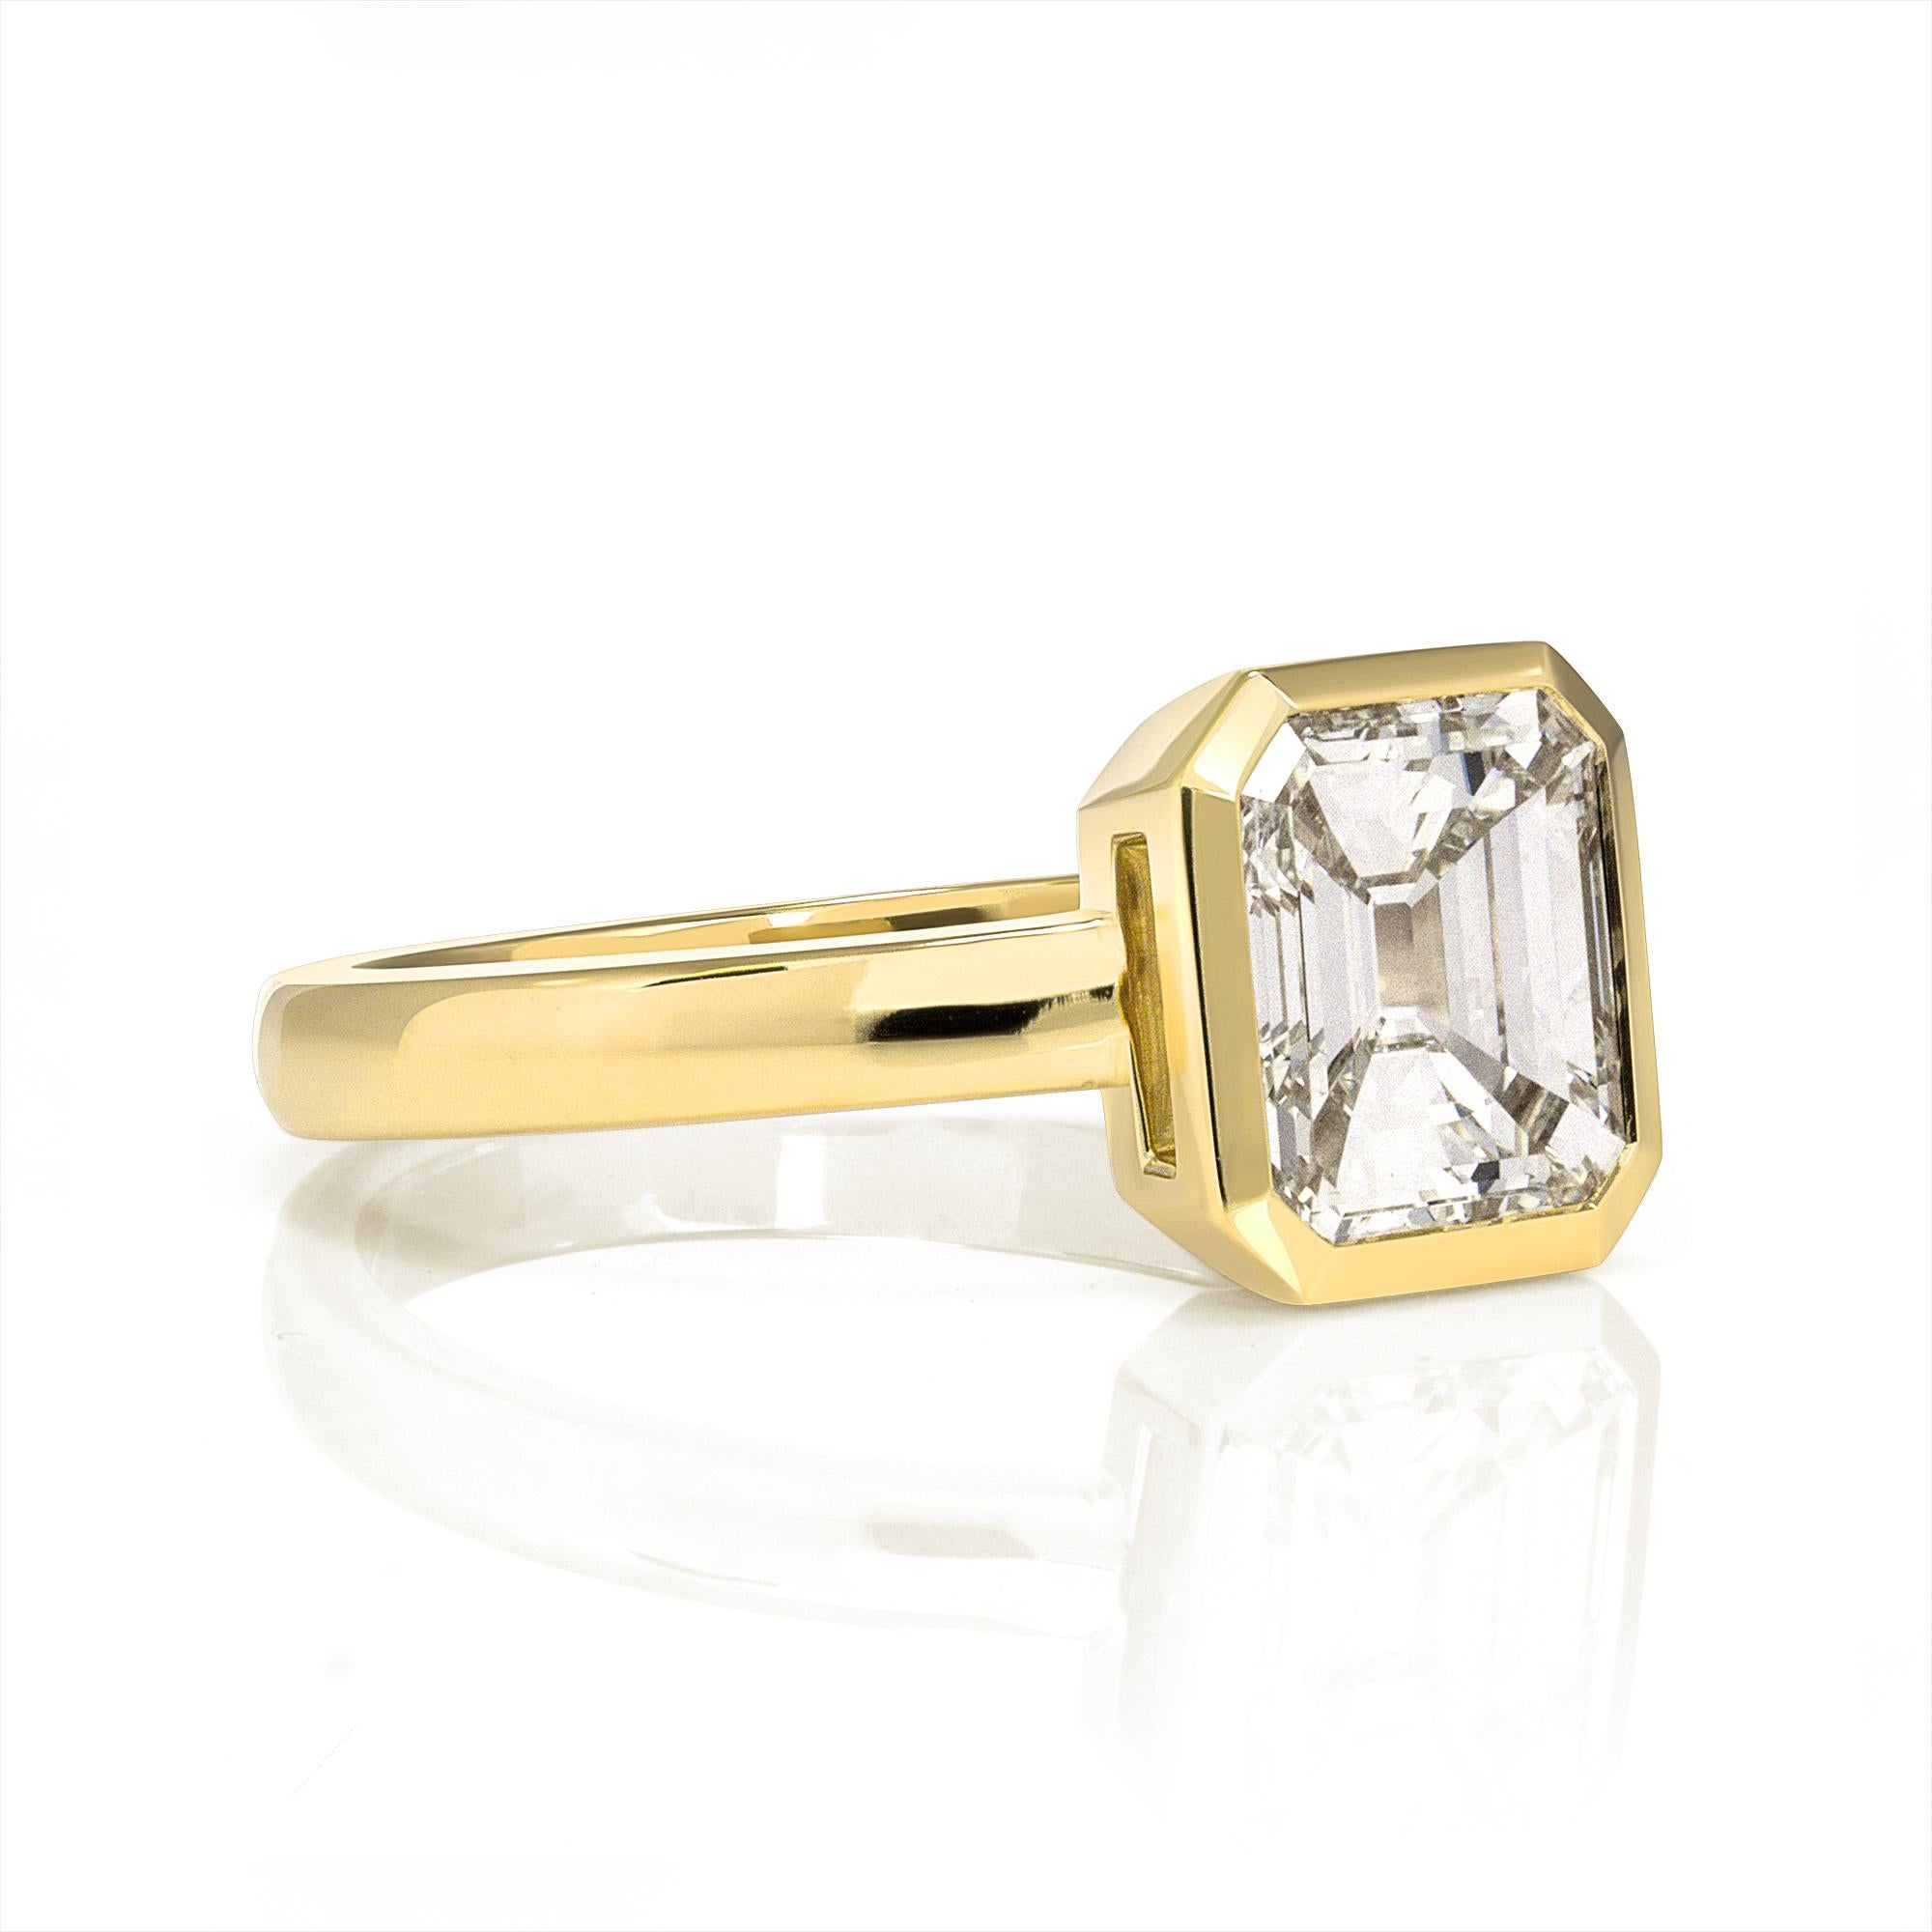 1.51ct M/VS2 GIA certified emerald cut diamond bezel set in a handcrafted 18K yellow gold mounting.